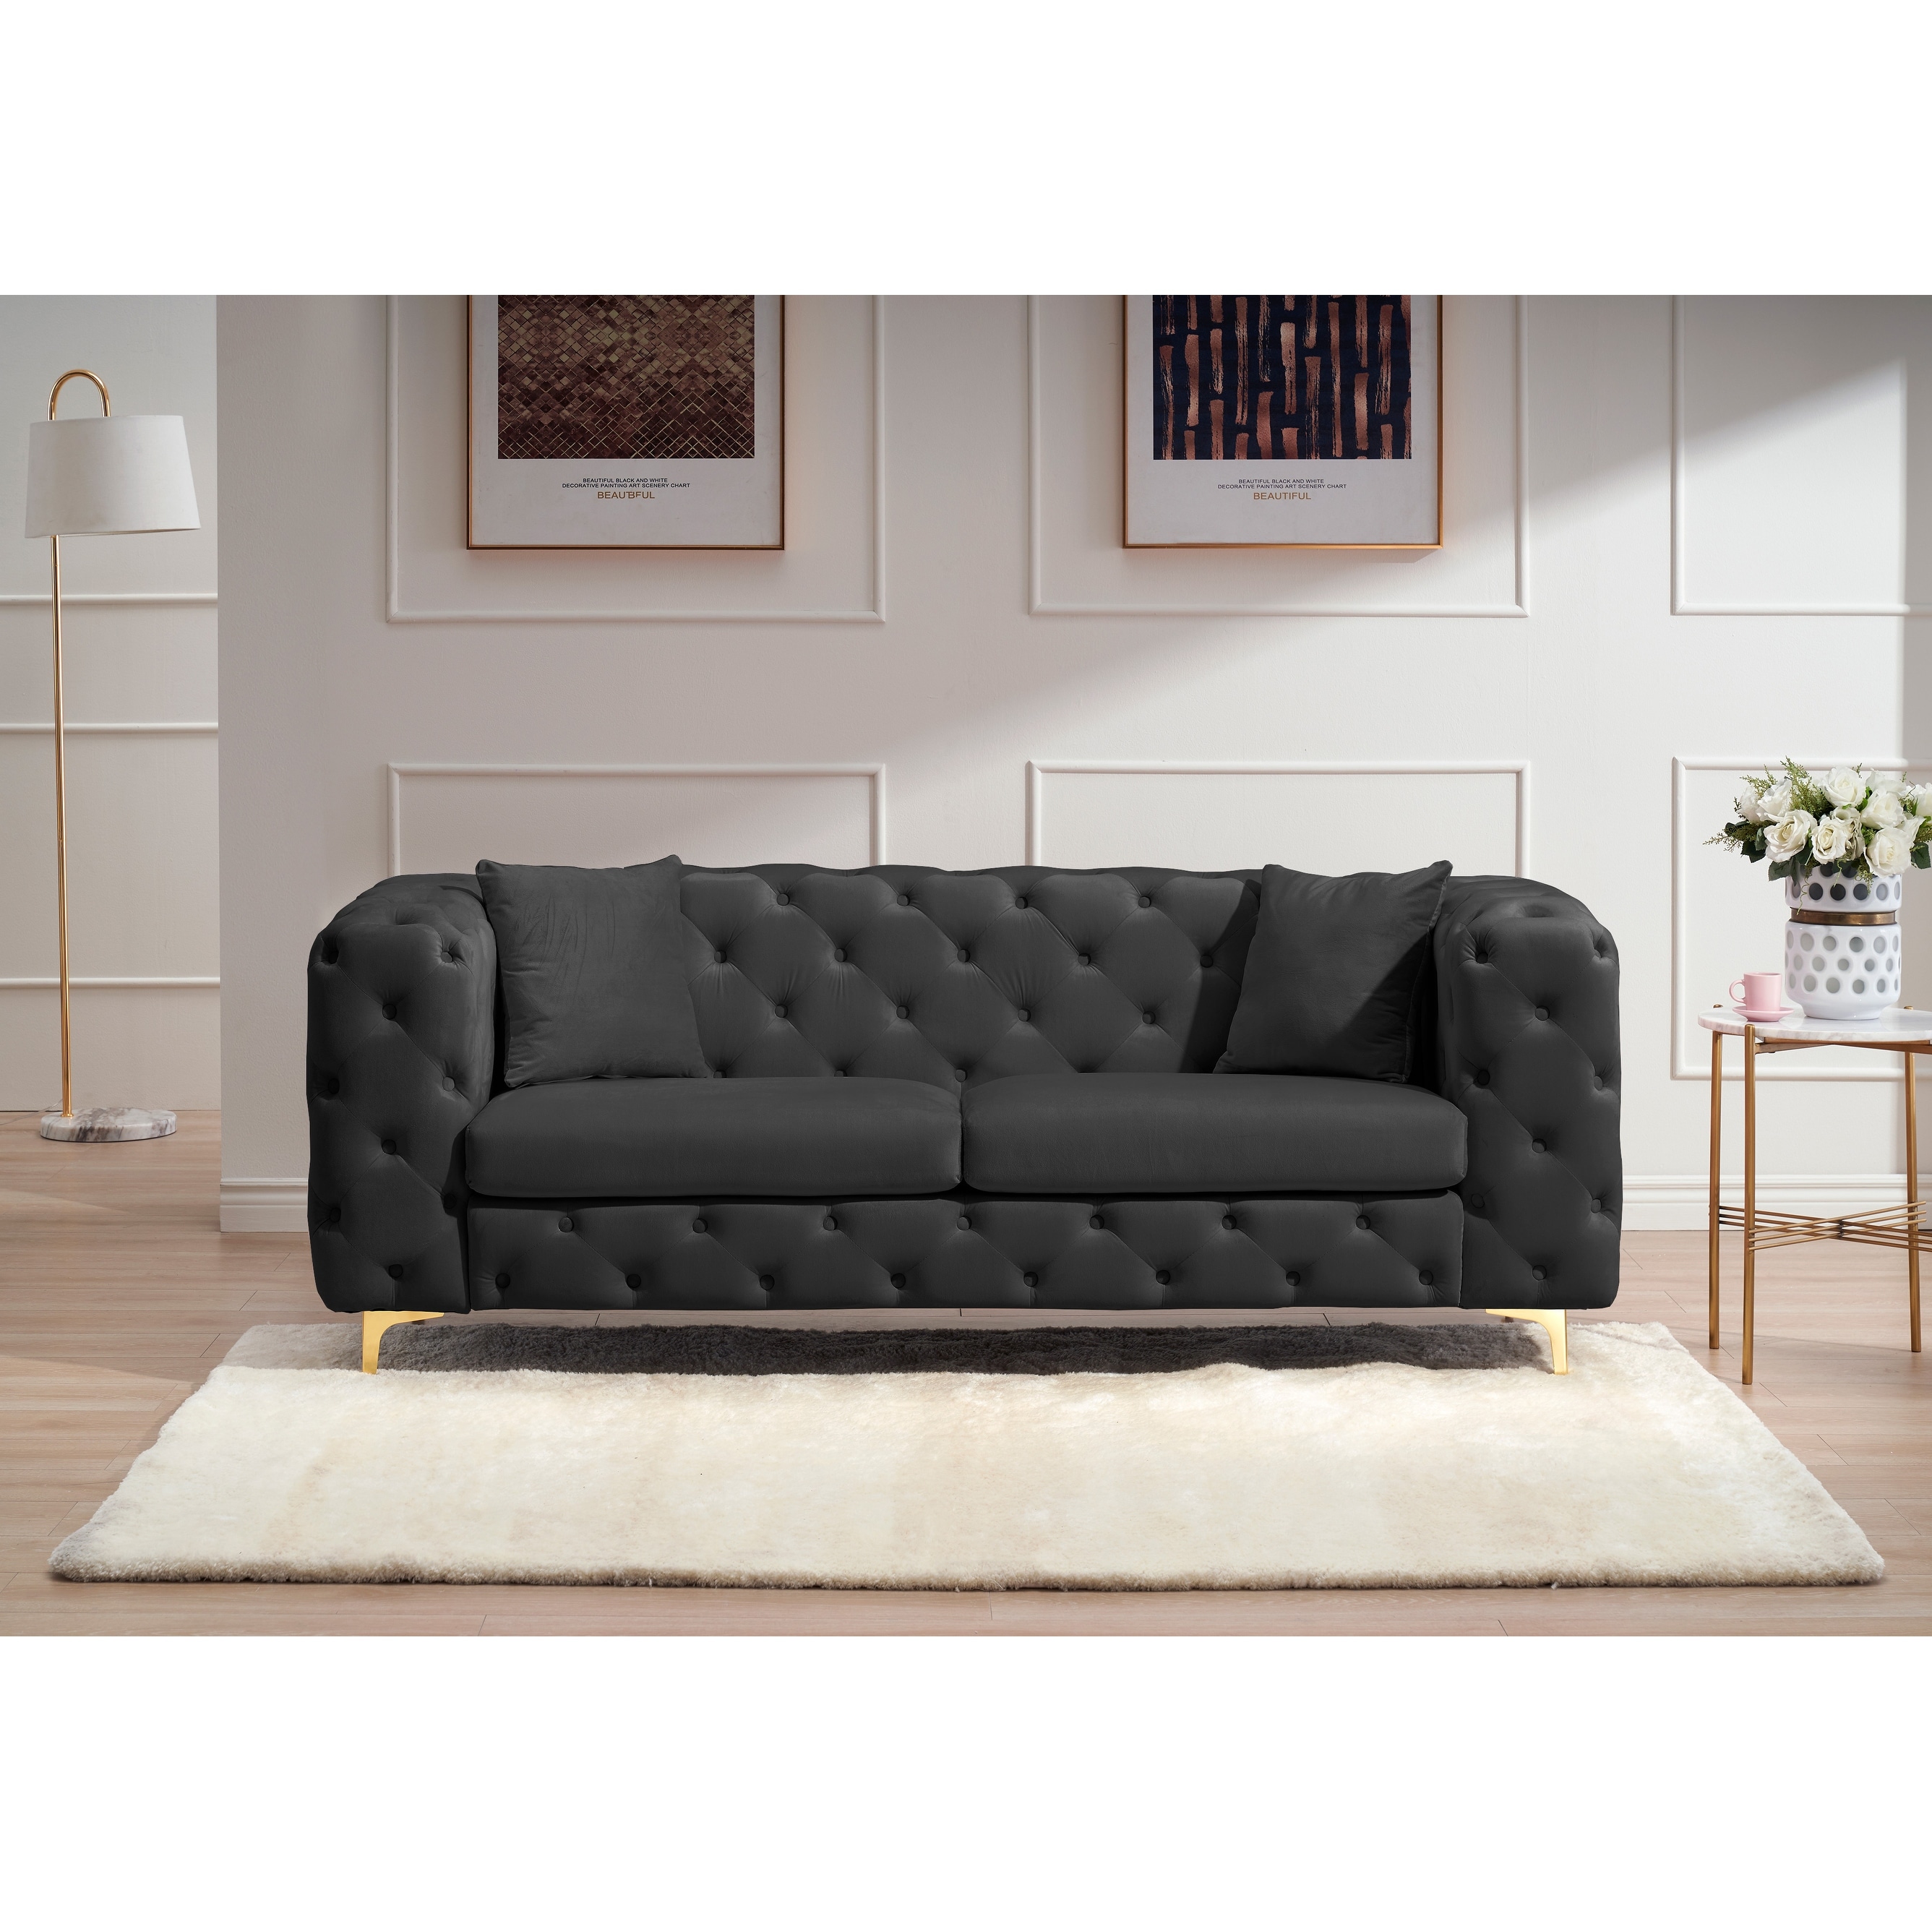 https://ak1.ostkcdn.com/images/products/is/images/direct/1be91ae1ba951bf7de62f6b44474907d7e6bd93e/New-design-comfortable-sofa-with-two-throw-pillows-in-the-same-color.jpg